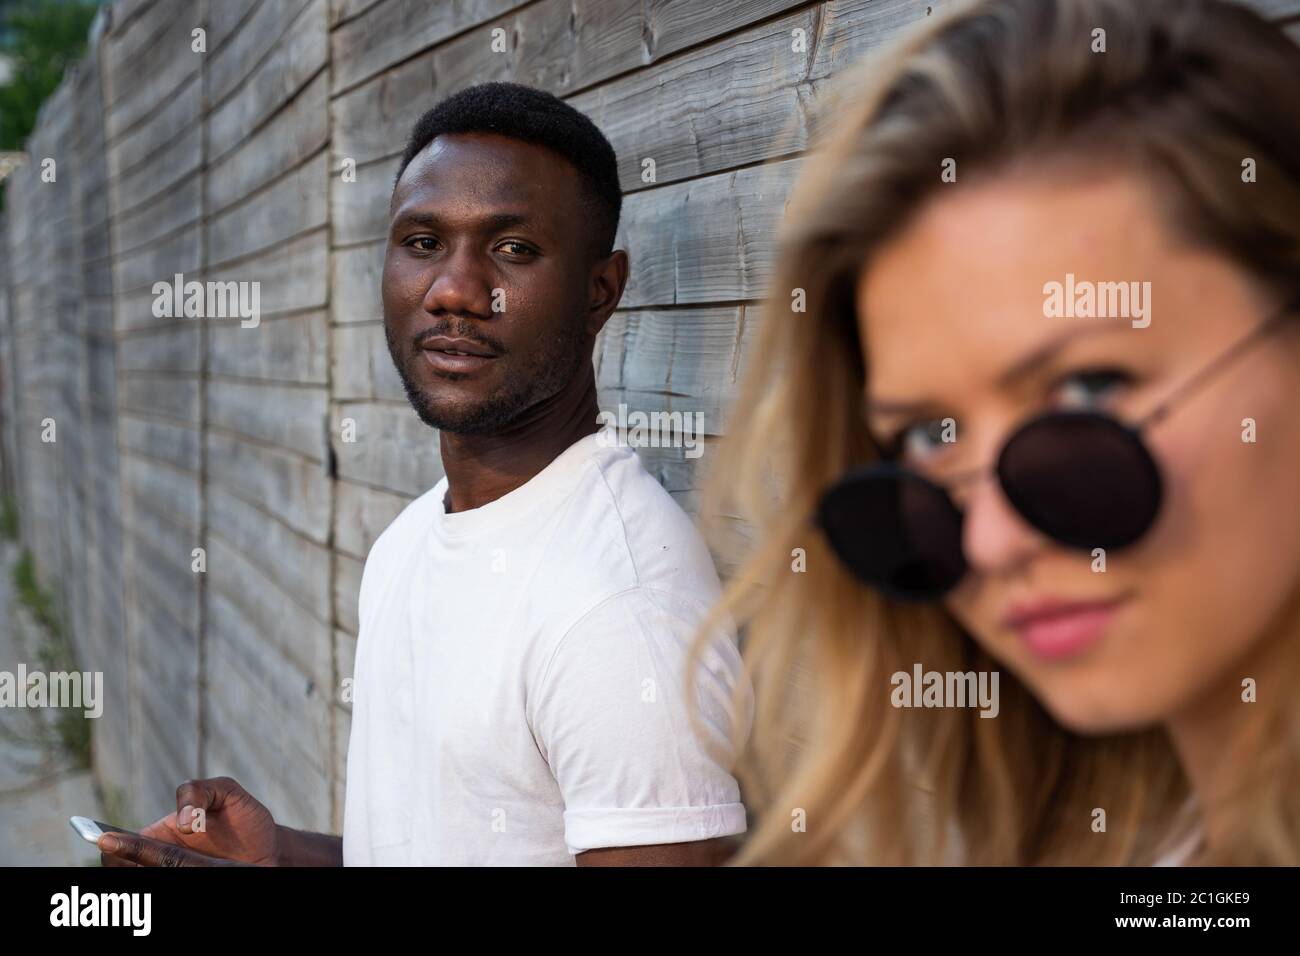 Young black man looking at camera. White woman in foreground. Focus on background. Stock Photo